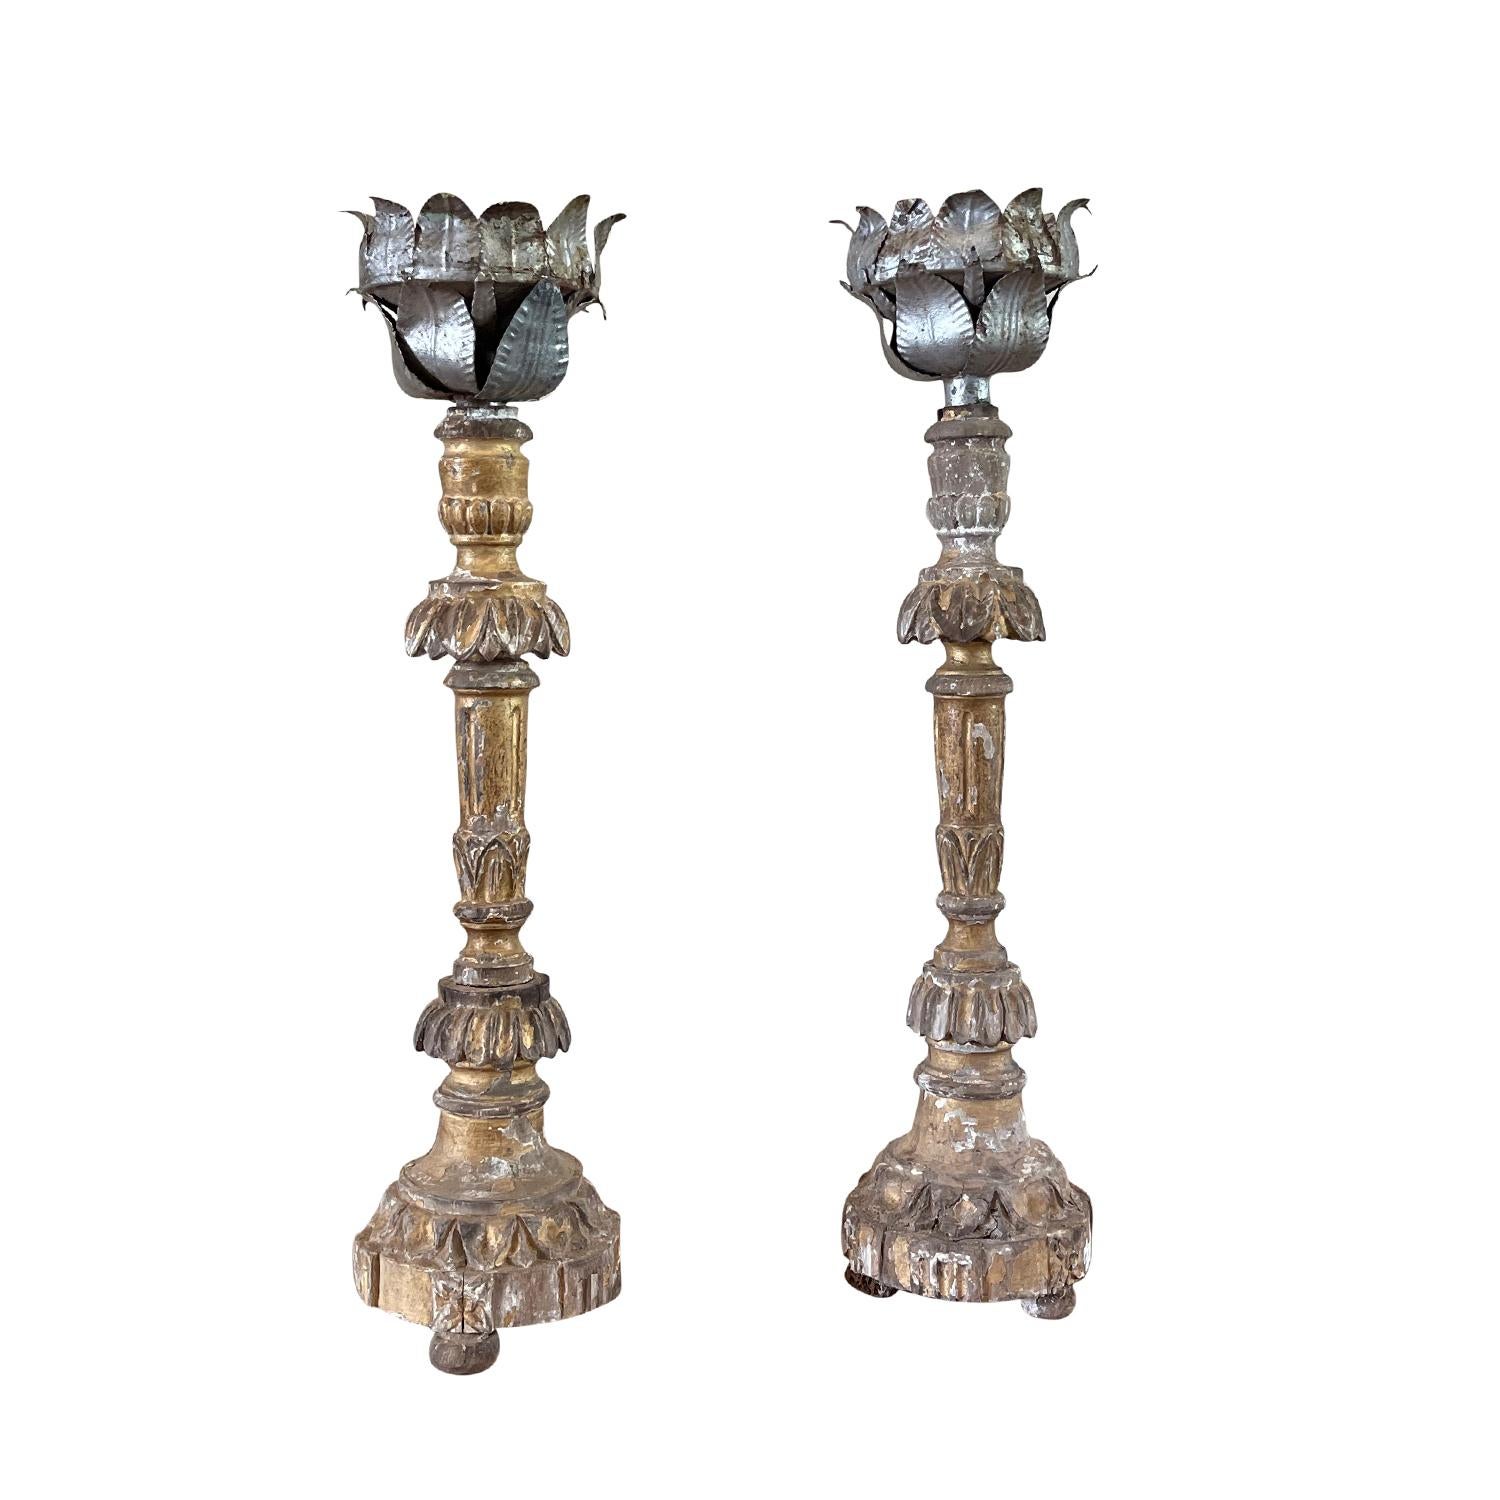 French Provincial 19th Century French Pair of Antique Pinewood Candle Holders For Sale